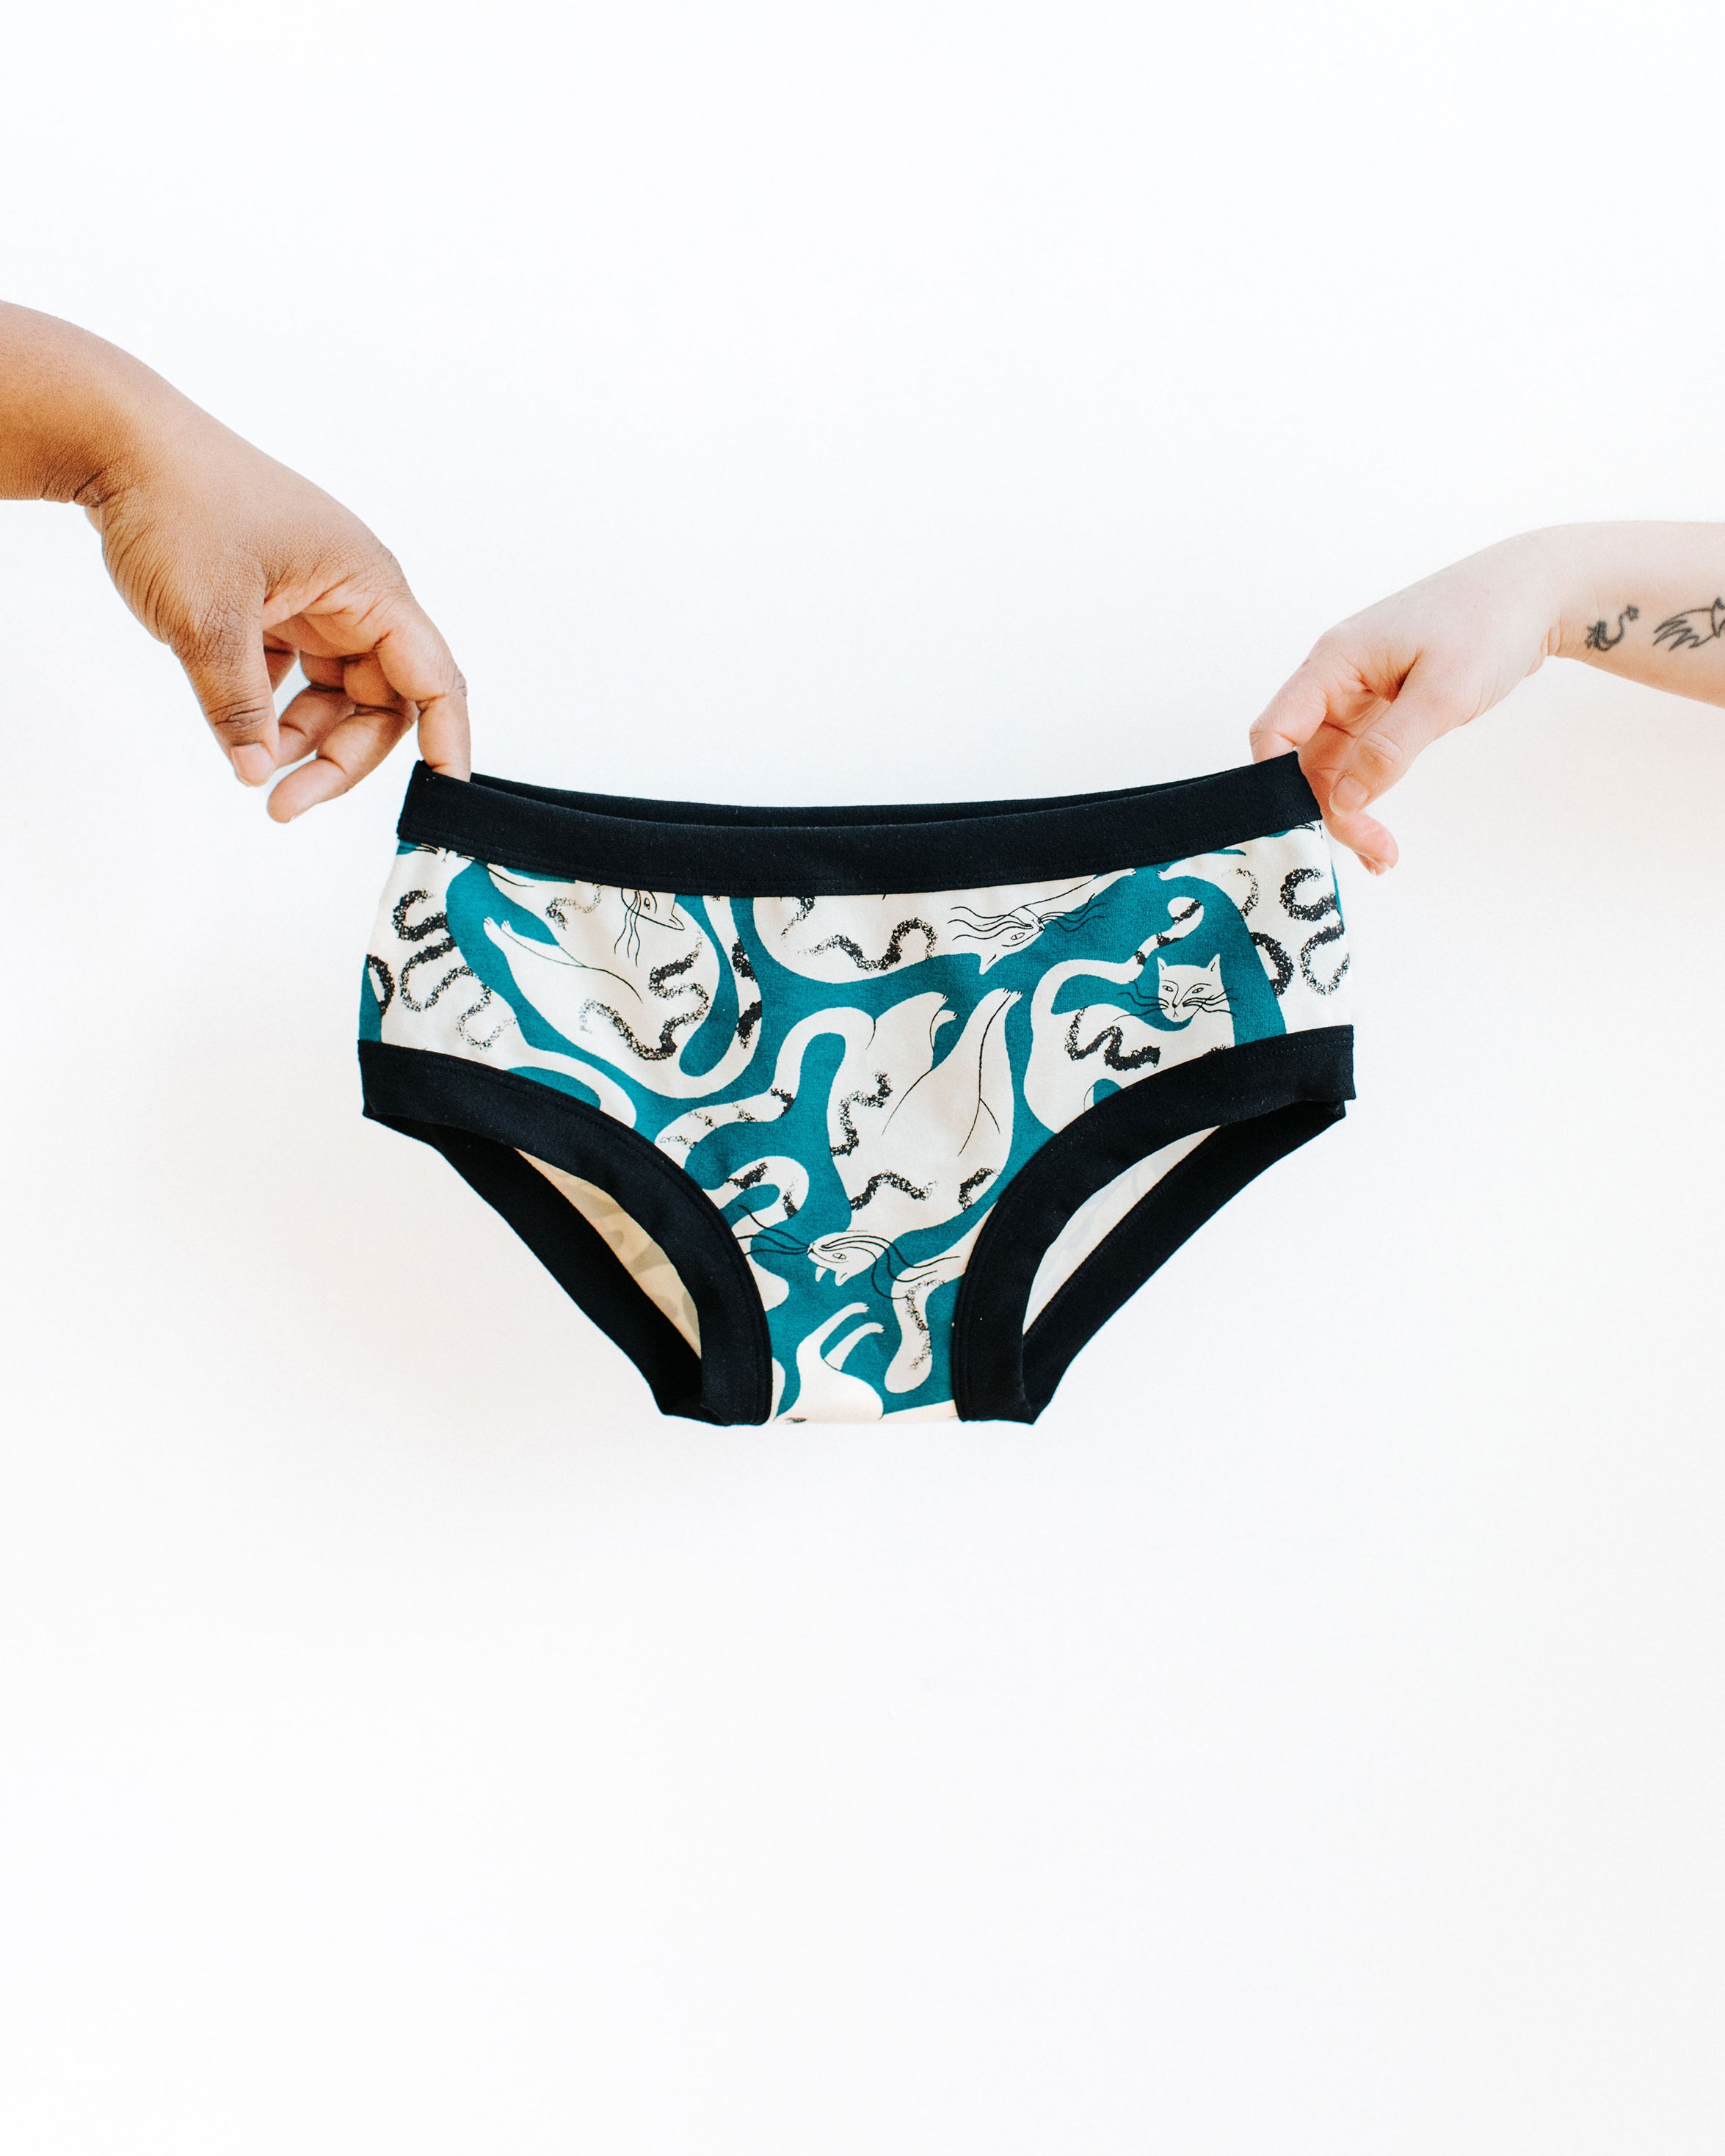 Thunderpants Hipster style underwear being held up by two hands in Hey Meow! print - green and white cats.